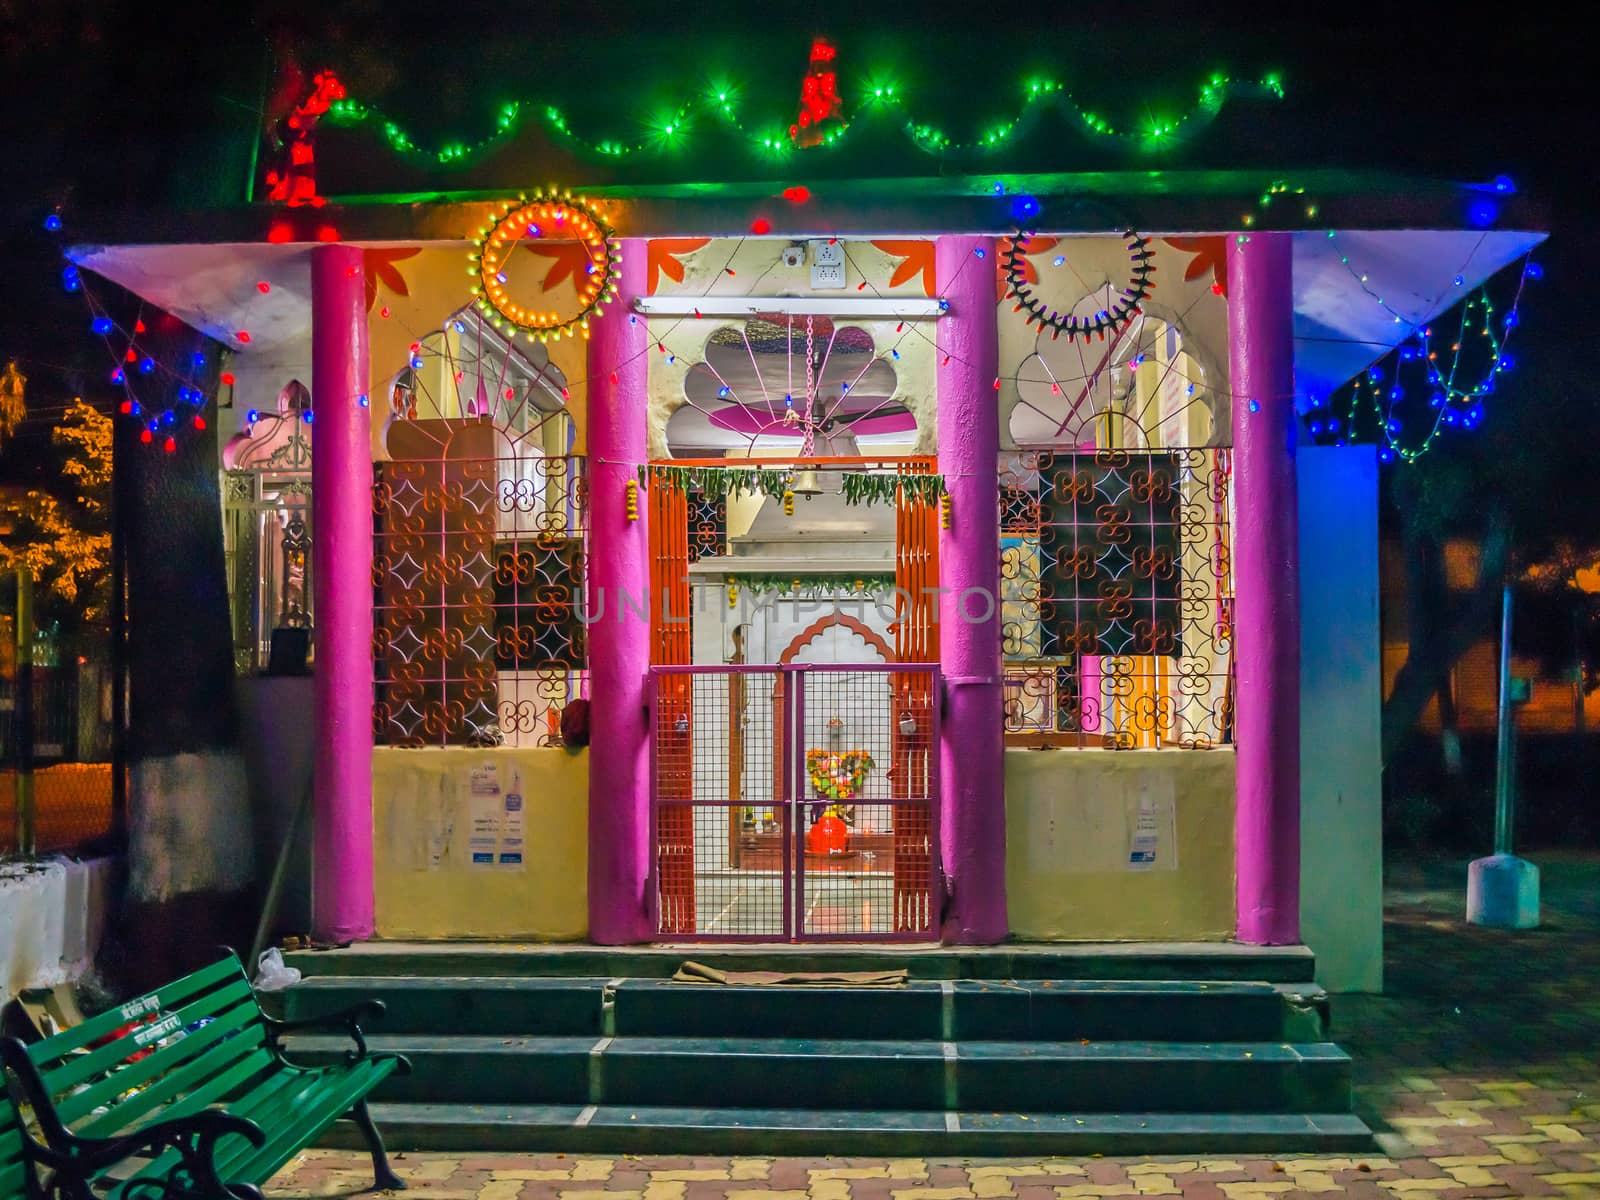 Decorated temple of Lord Hanuman with lighting series at night.